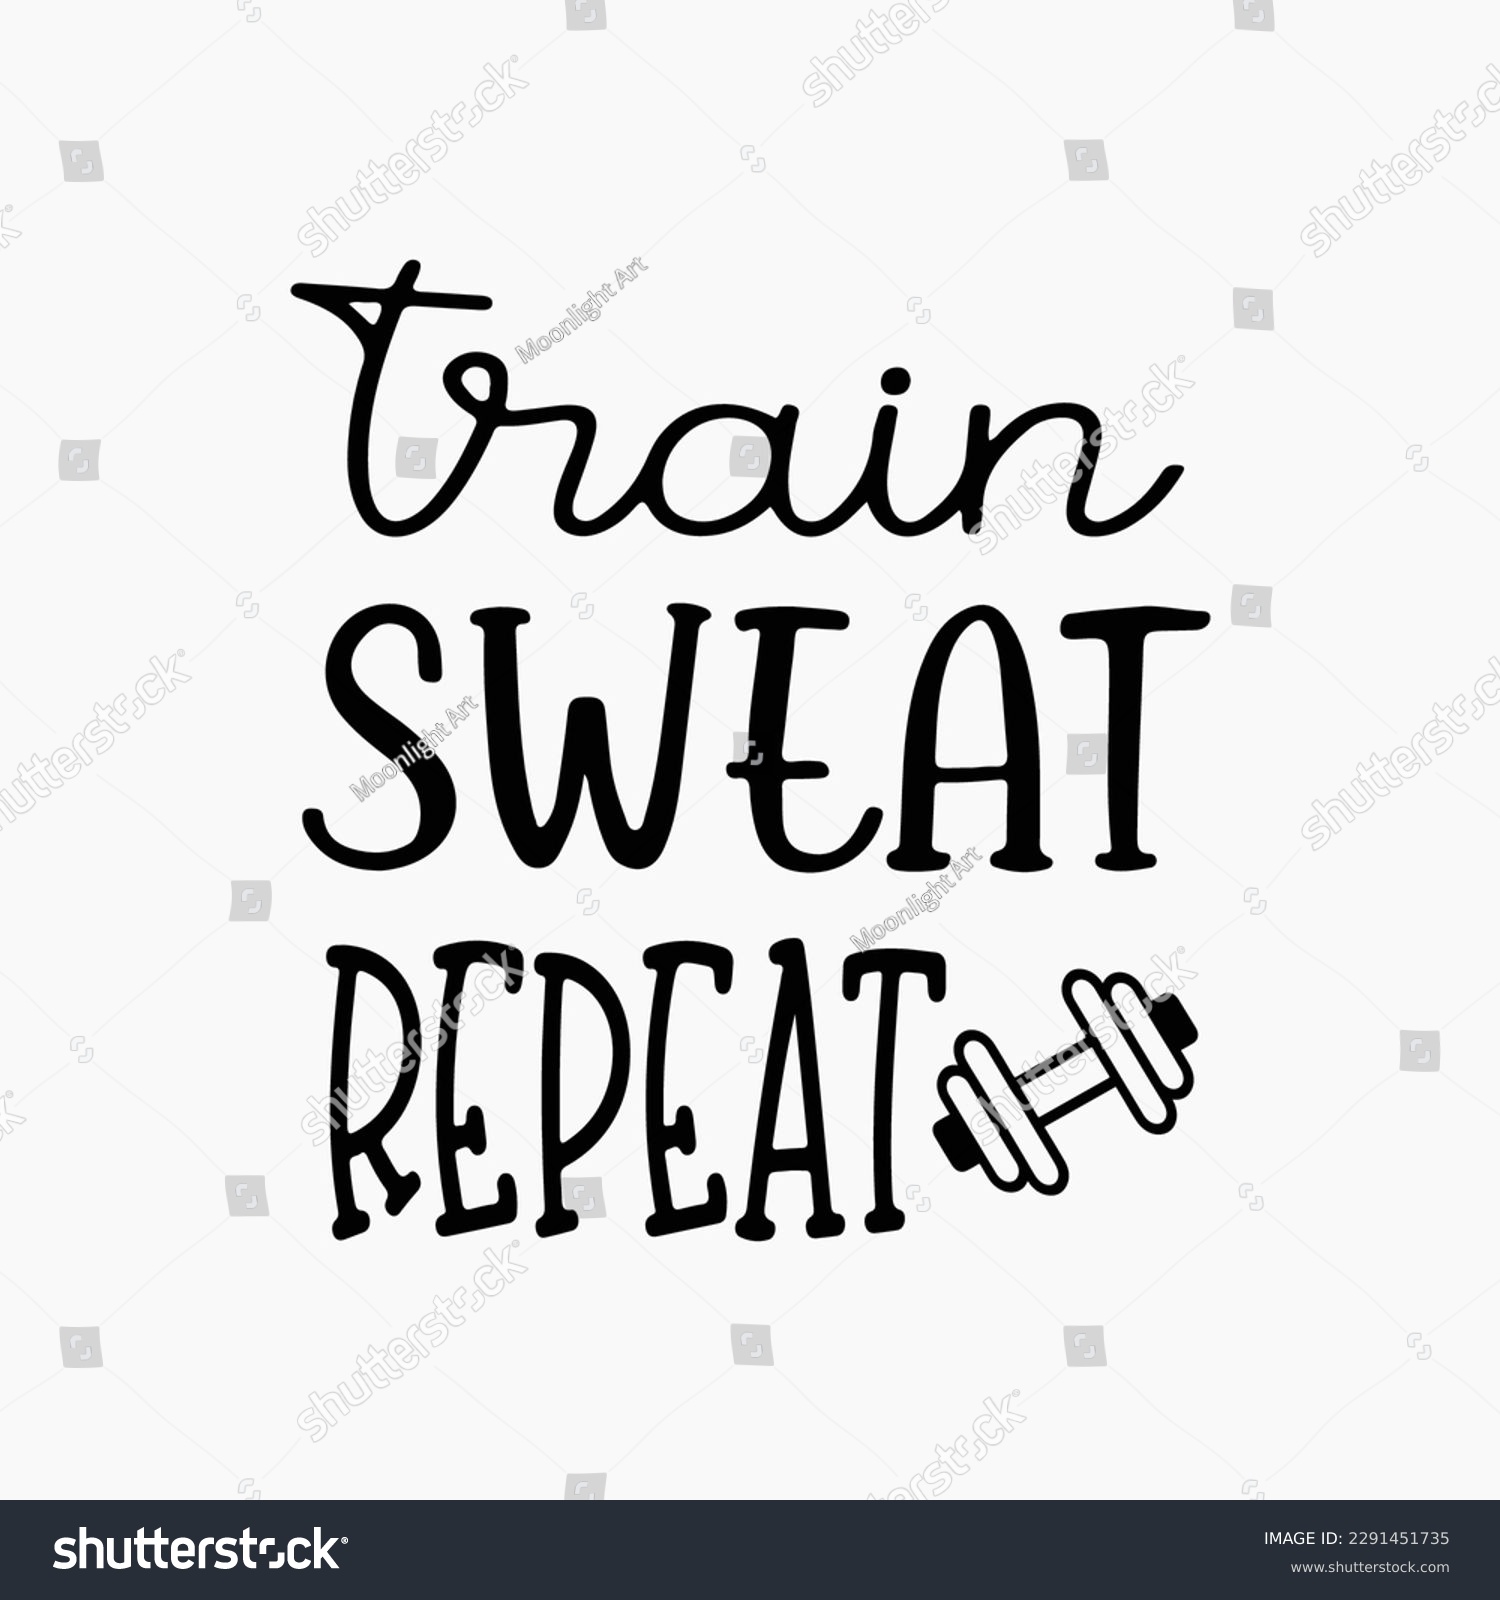 SVG of Train Sweat Repeat Svg, Gym, Workout Svg, Fitness Svg, Gym Shirt Saying, Svg Files for Cricut, Barbell, Weights, Motivation  svg